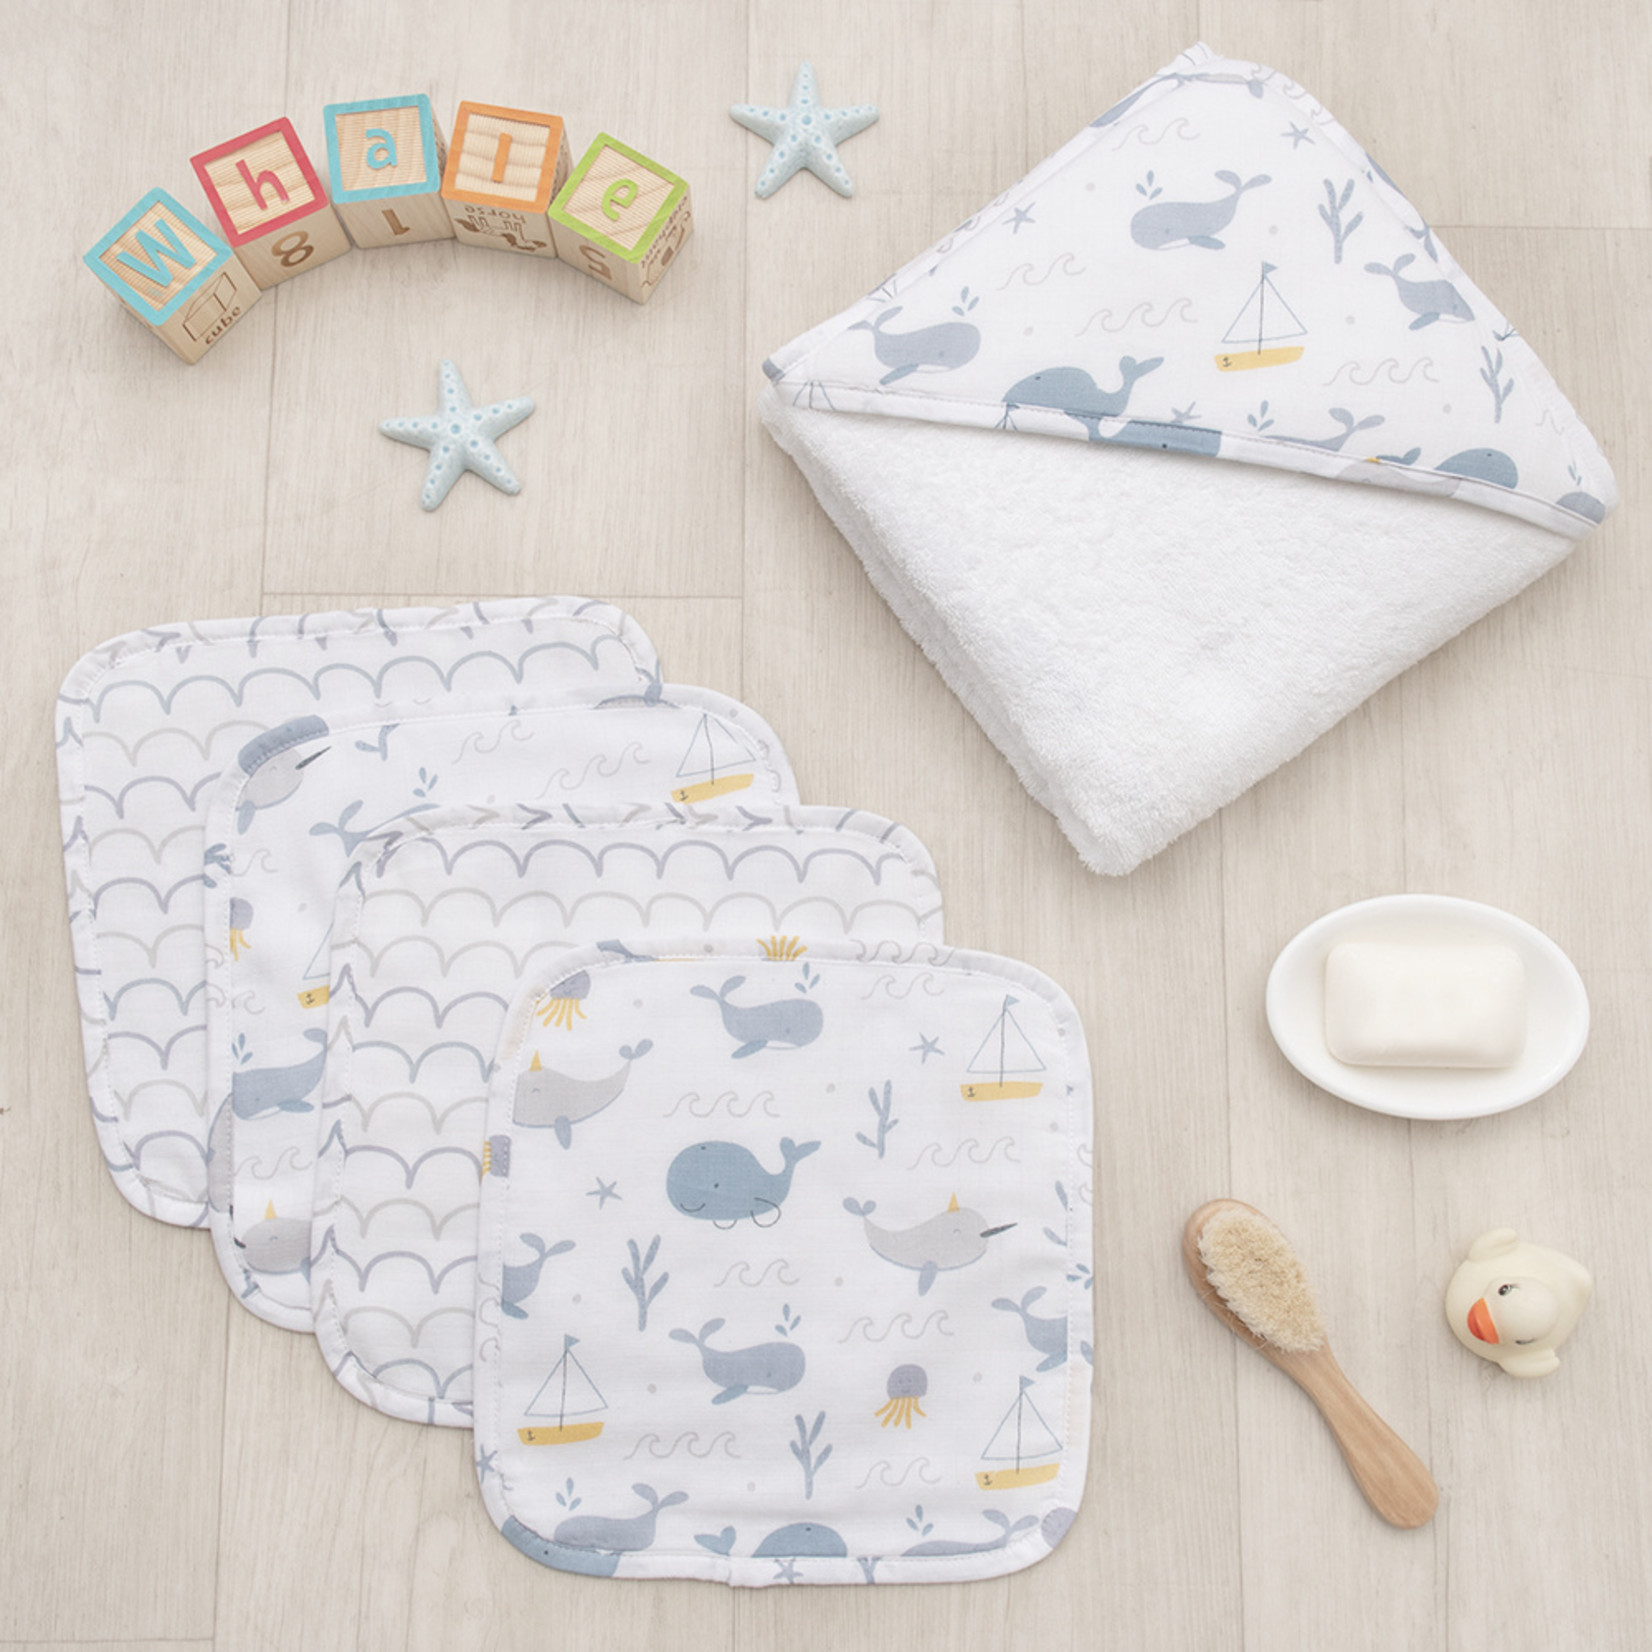 Living Textiles 5-piece Bath Gift Set-Whale of a Time